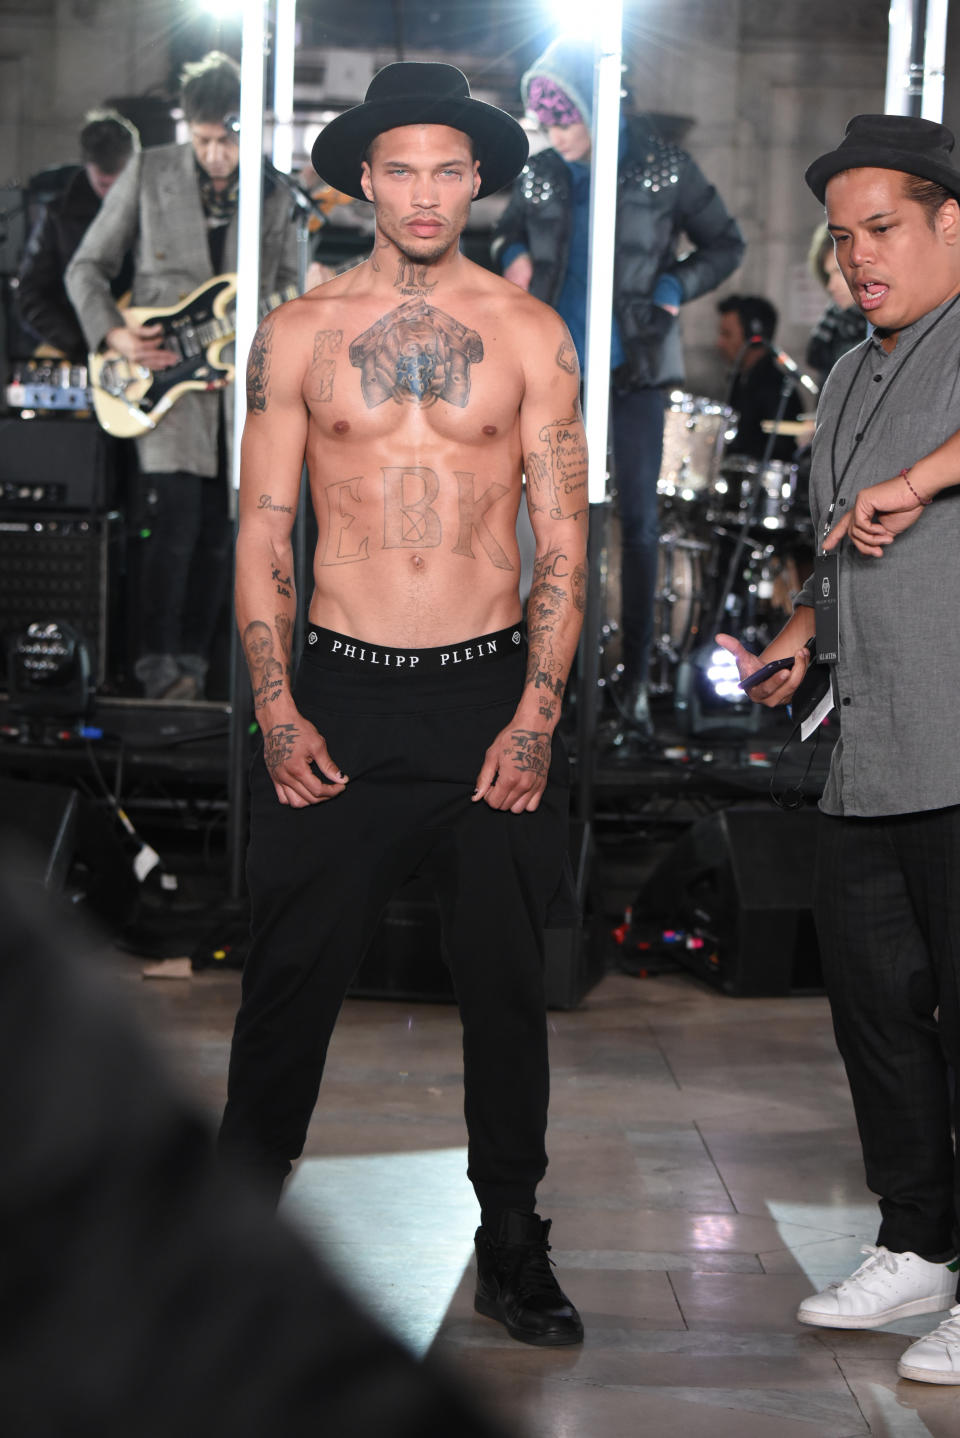 Jeremy, 34, walked in the Philipp Plein collection during, New York Fashion Week back in February. Photo: Getty